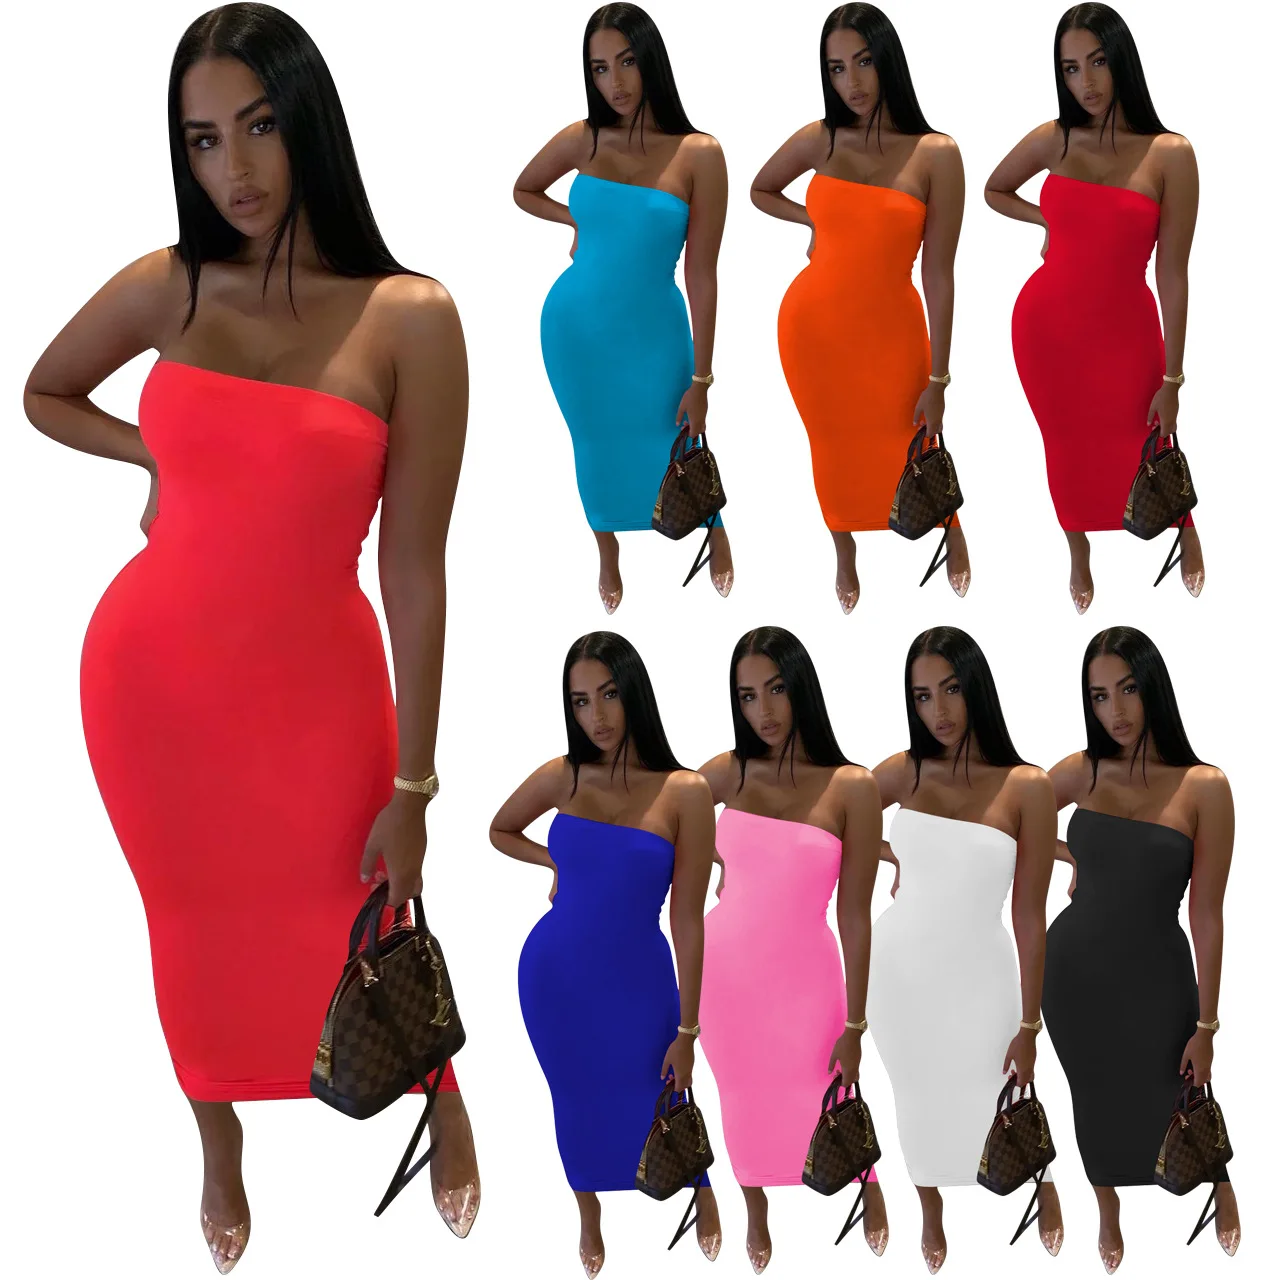 

New Trends Wholesale Charming Strapless Boat Neck Sleeveless Summer Length Bodycon Dress For Ladies Dresses Women Clothing, White,pink,orange,red,black,deep blue,blue,fluorescence pink